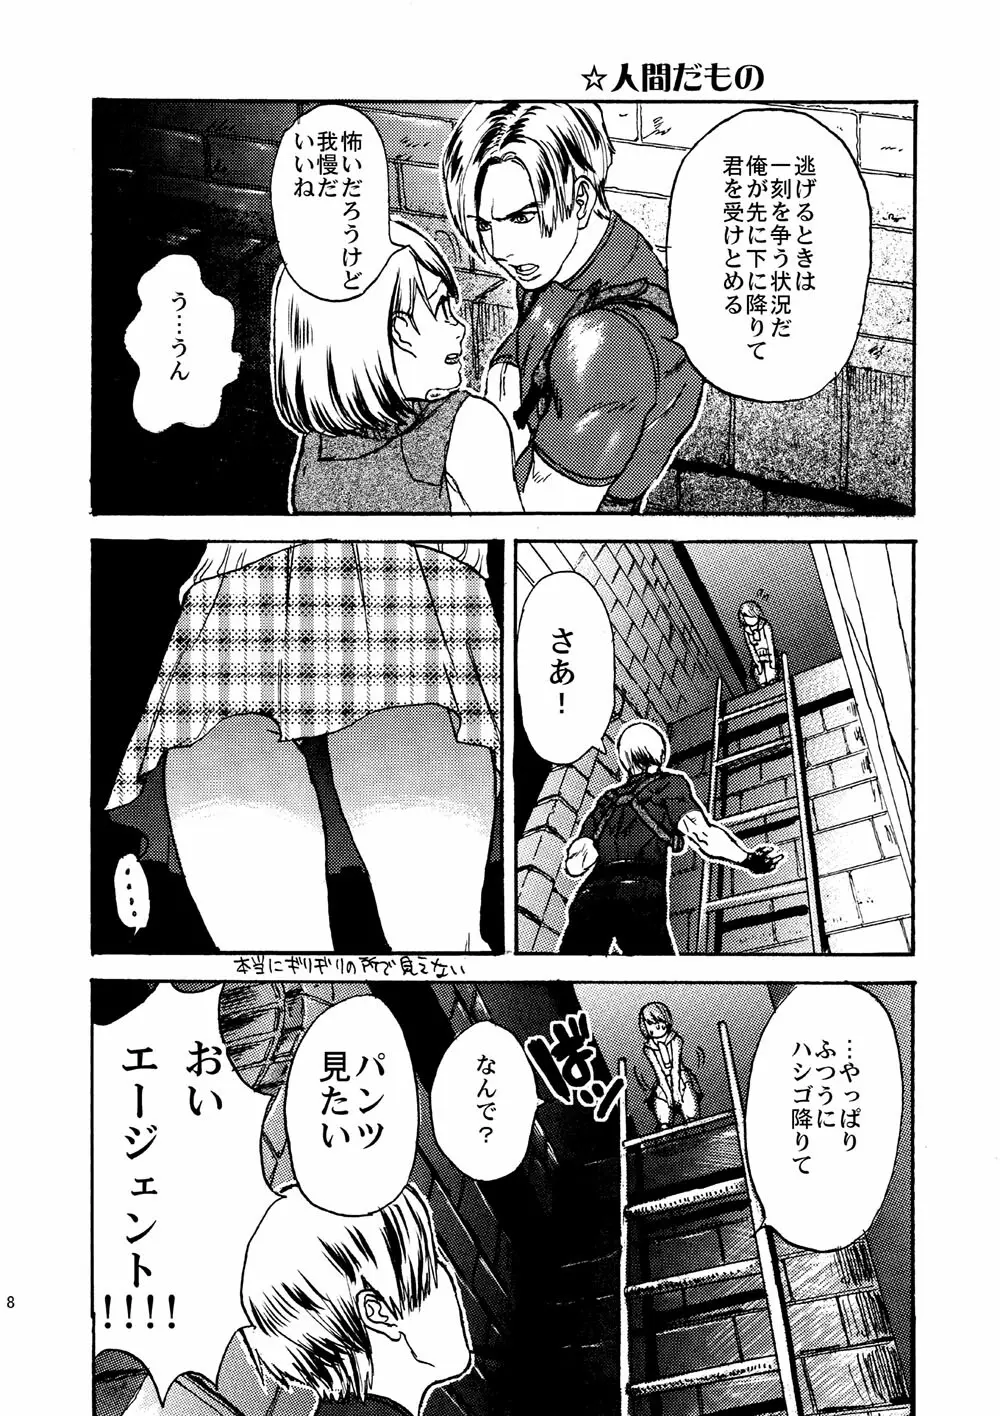 VILLAGE OF FEAR/バイオ４同人誌ｗｅｂ再録 Page.5